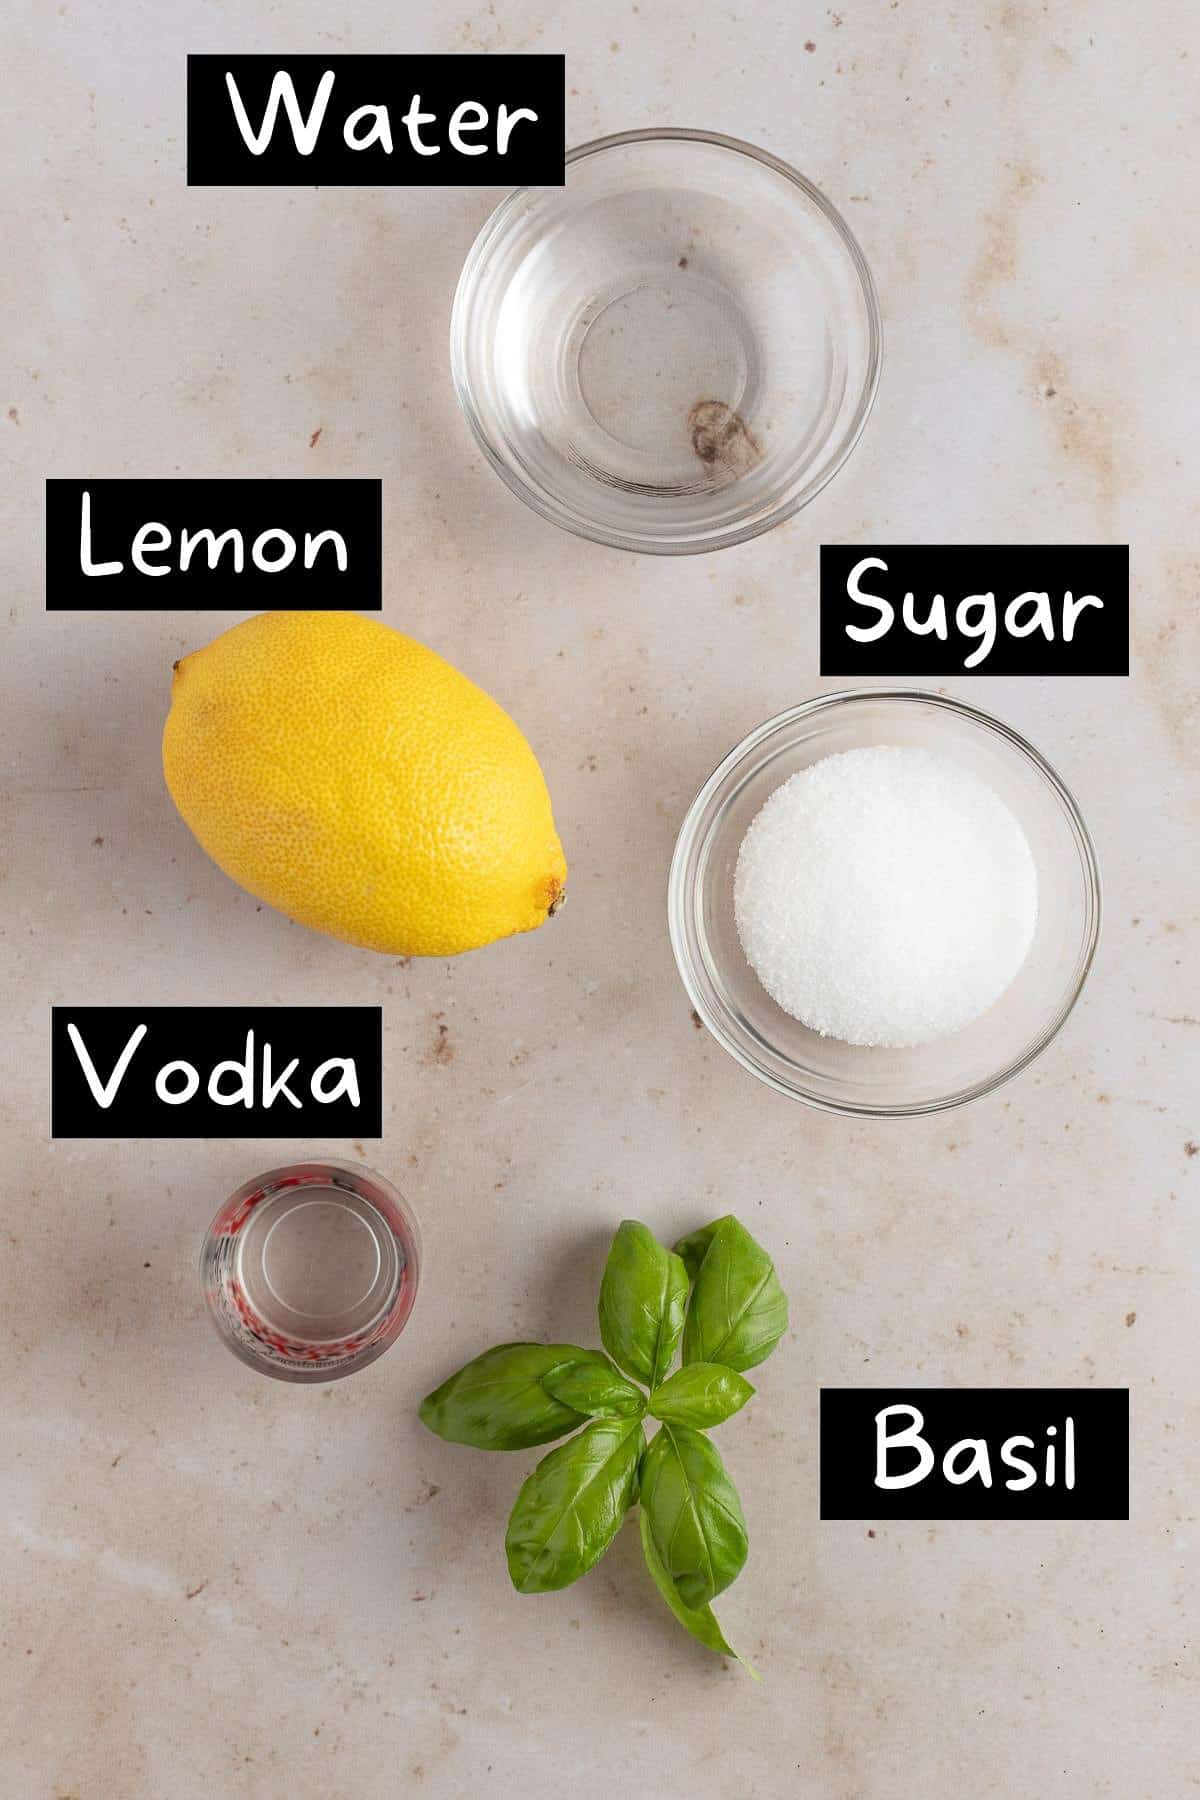 The ingredients needed to make the martini.